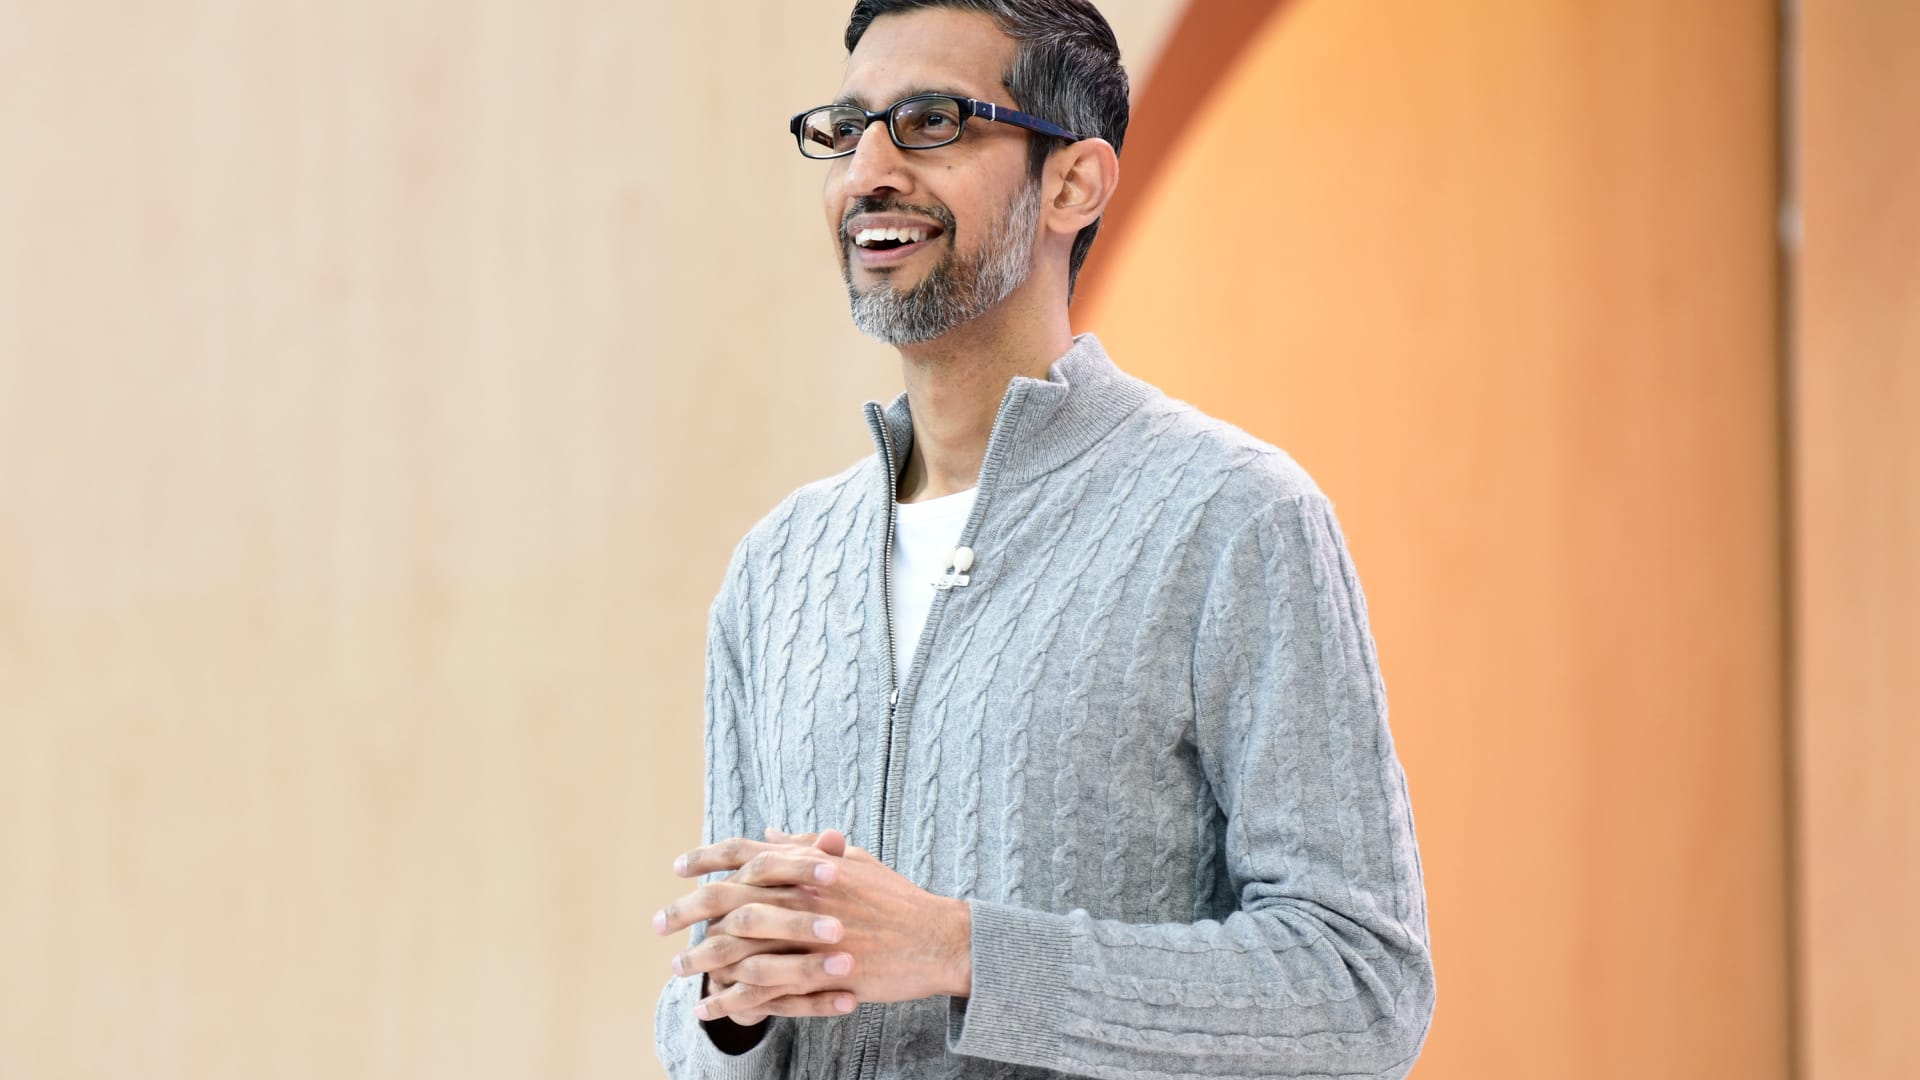 Alphabet reportedly weighing offer for HubSpot, sending shares in the $32 billion marketing company up 9%